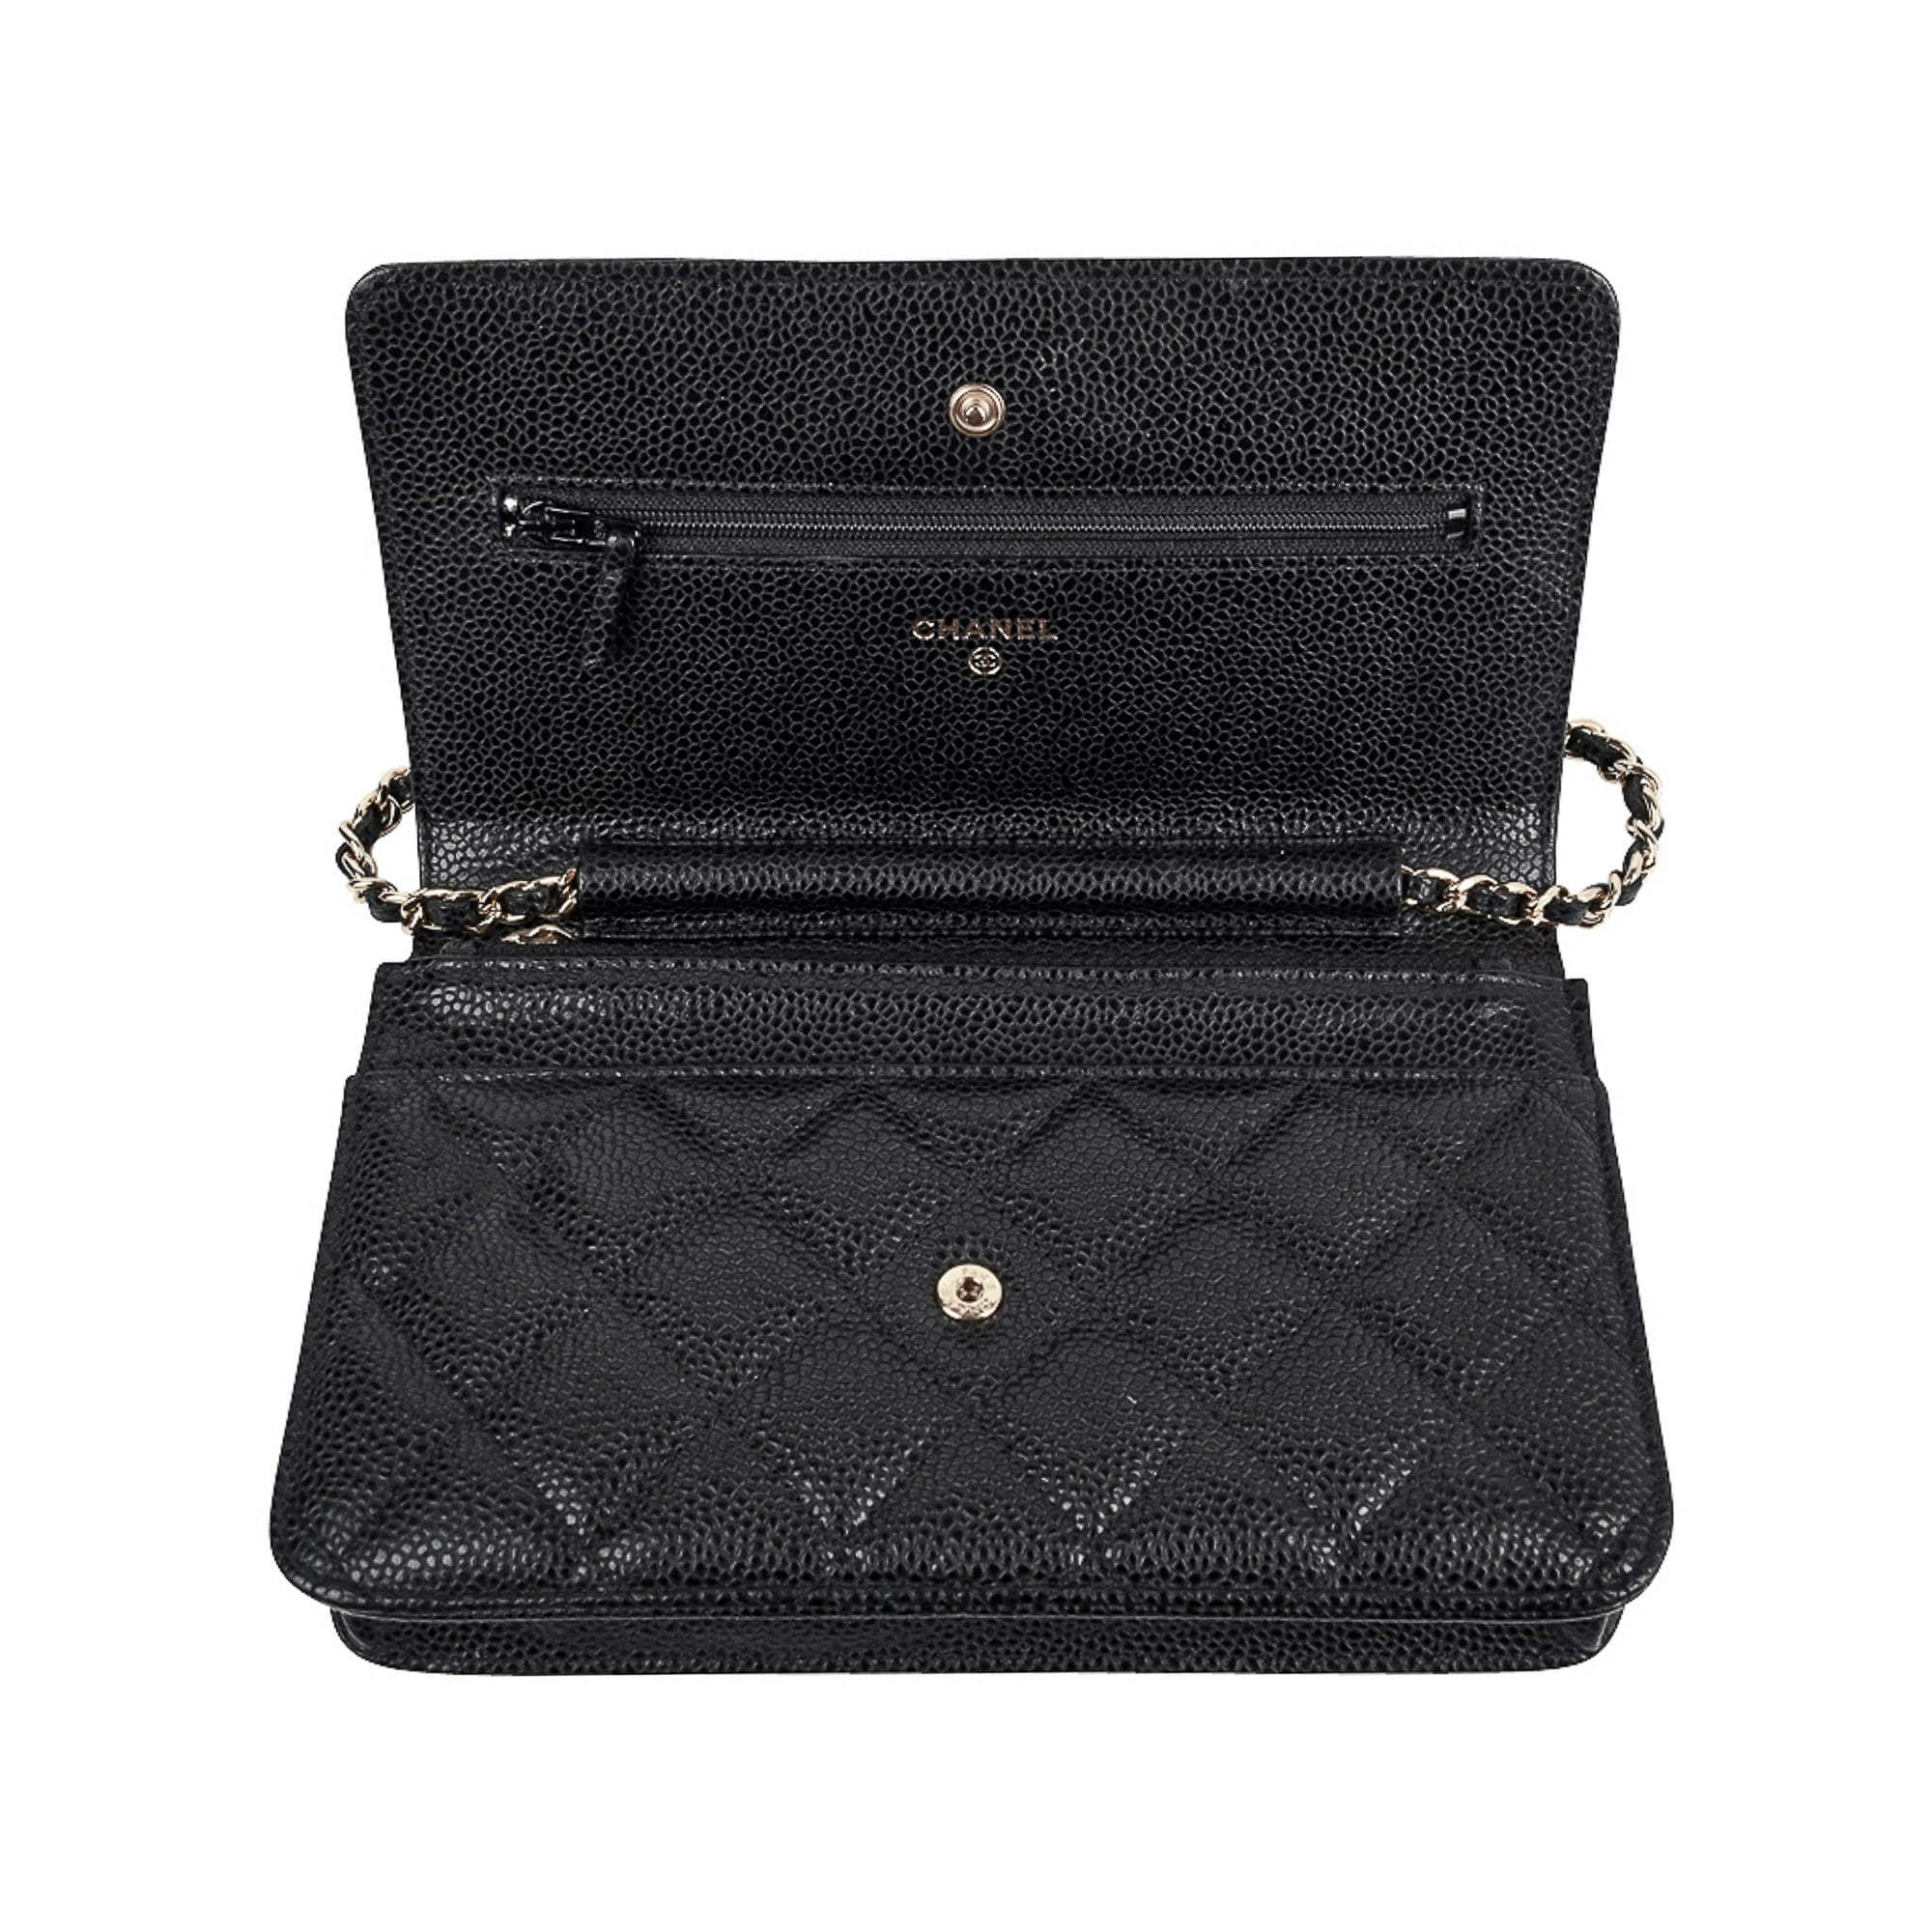 Chanel Wallet on Chain WOC Caviar Black Quilted Leather Bag w/Box ...